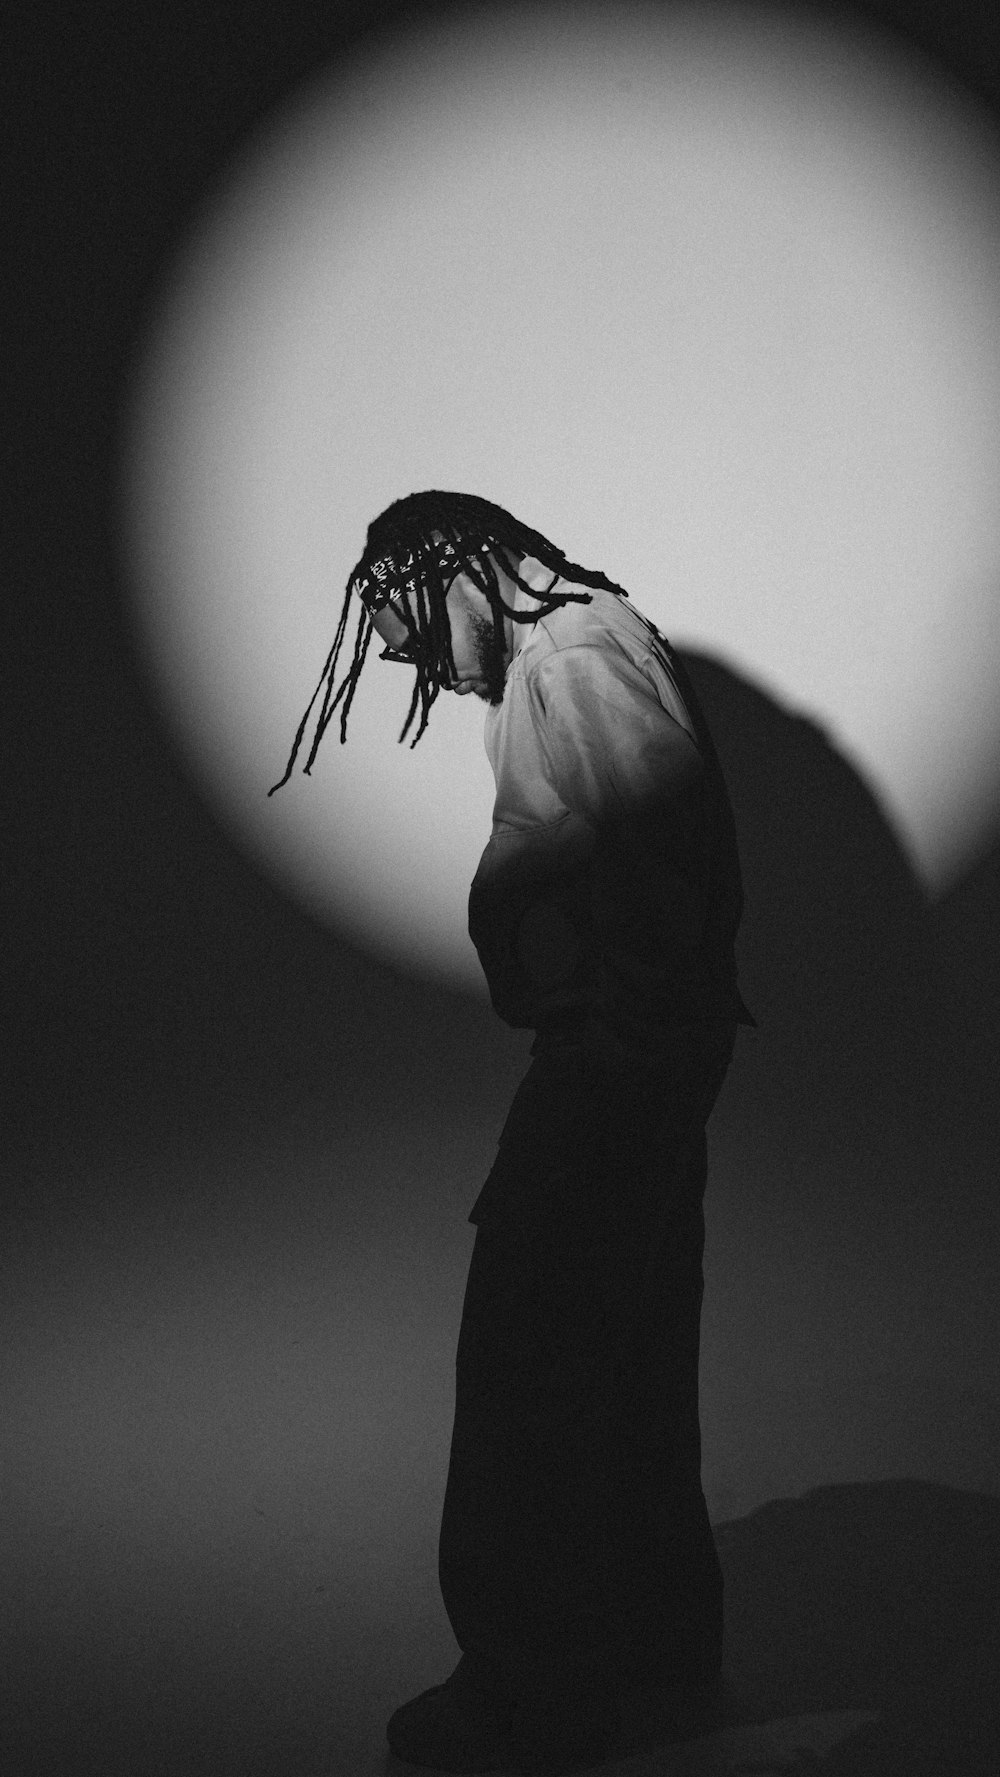 a person with dreadlocks standing in a dark room